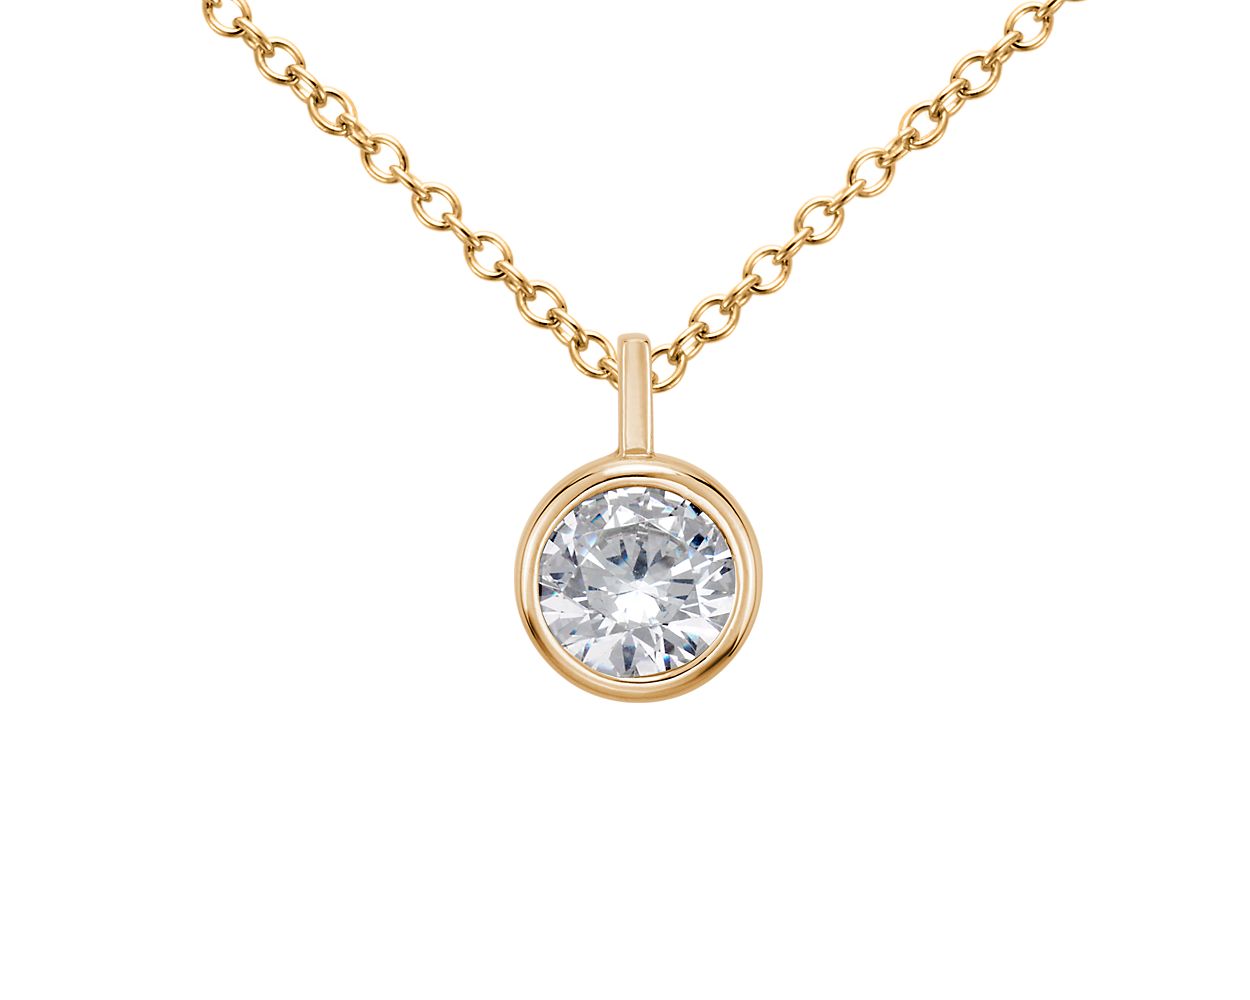 Bezel Solitaire Pendant Setting in 14k Yellow Gold